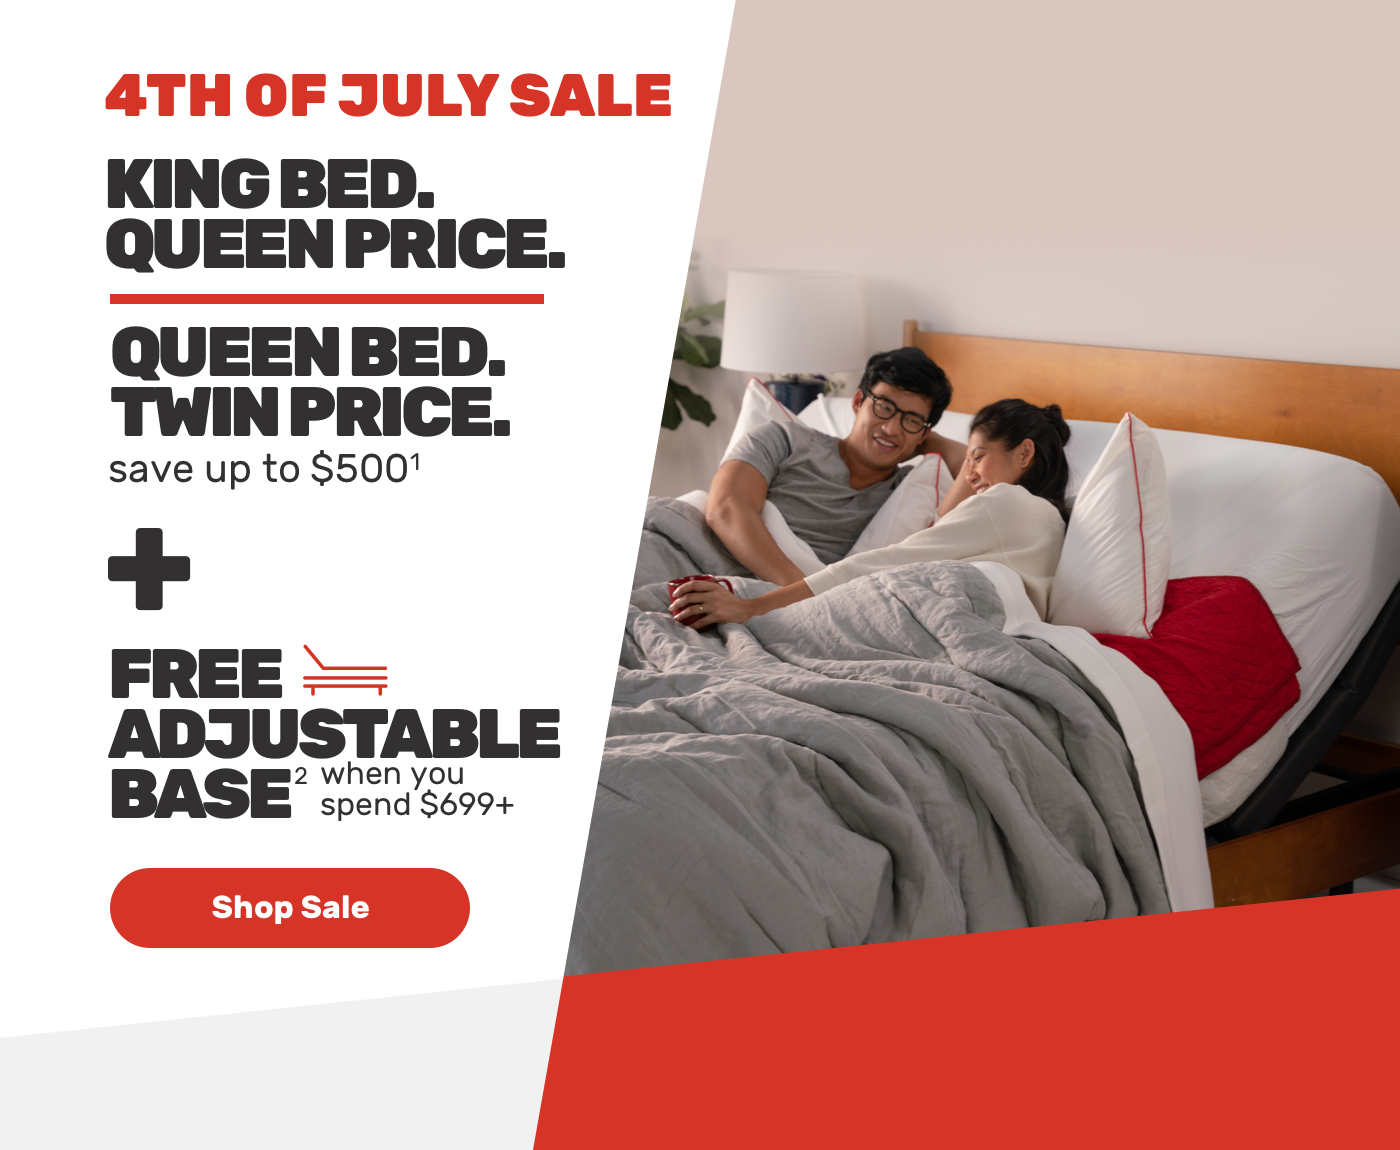 4th of July Sale.King bed Queen Price.Queen Bed Twin Price.+Save upto $500 + free Adjustable base when you spend $699